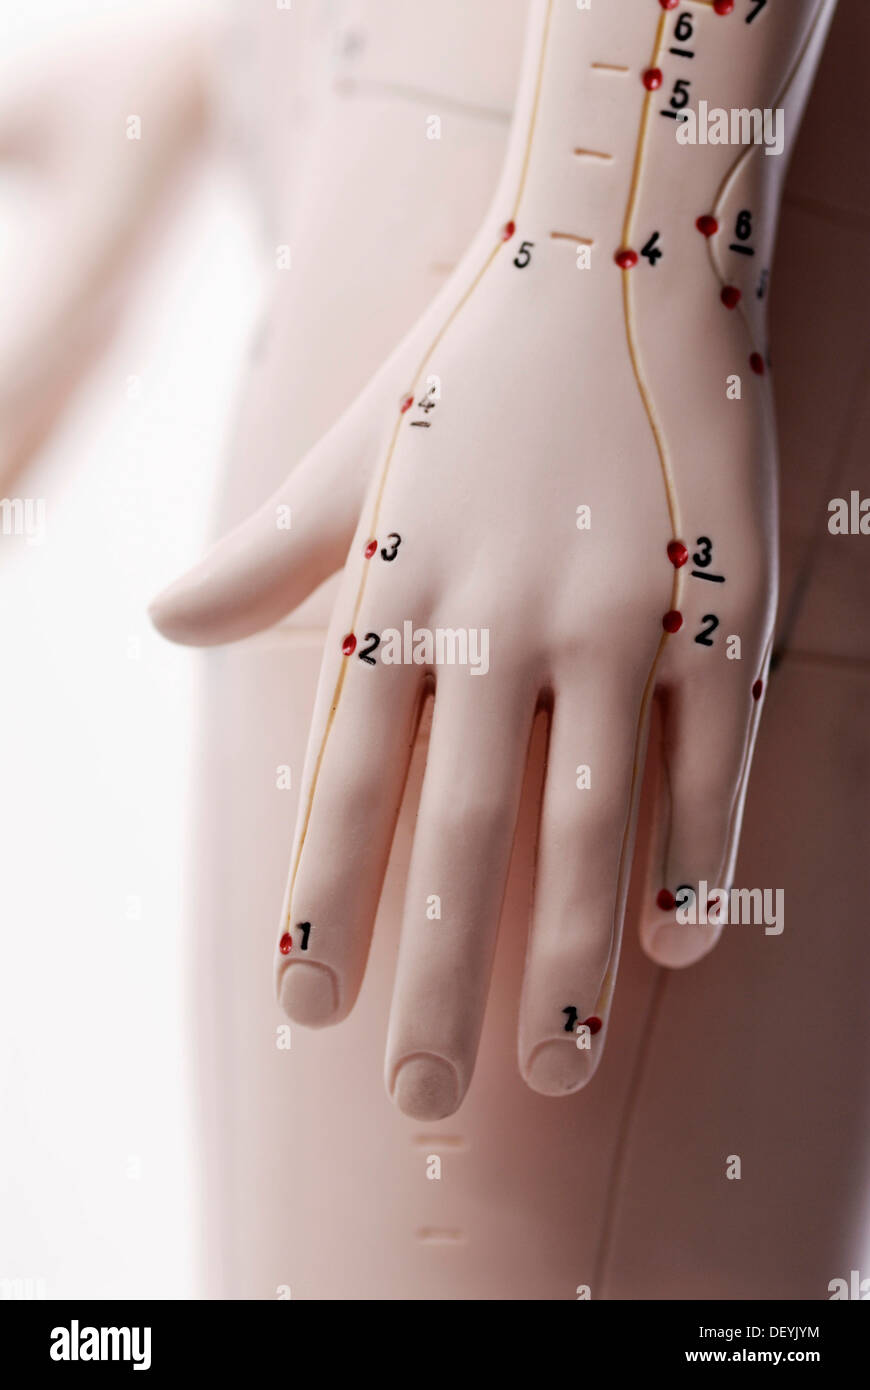 acupuncture points hand